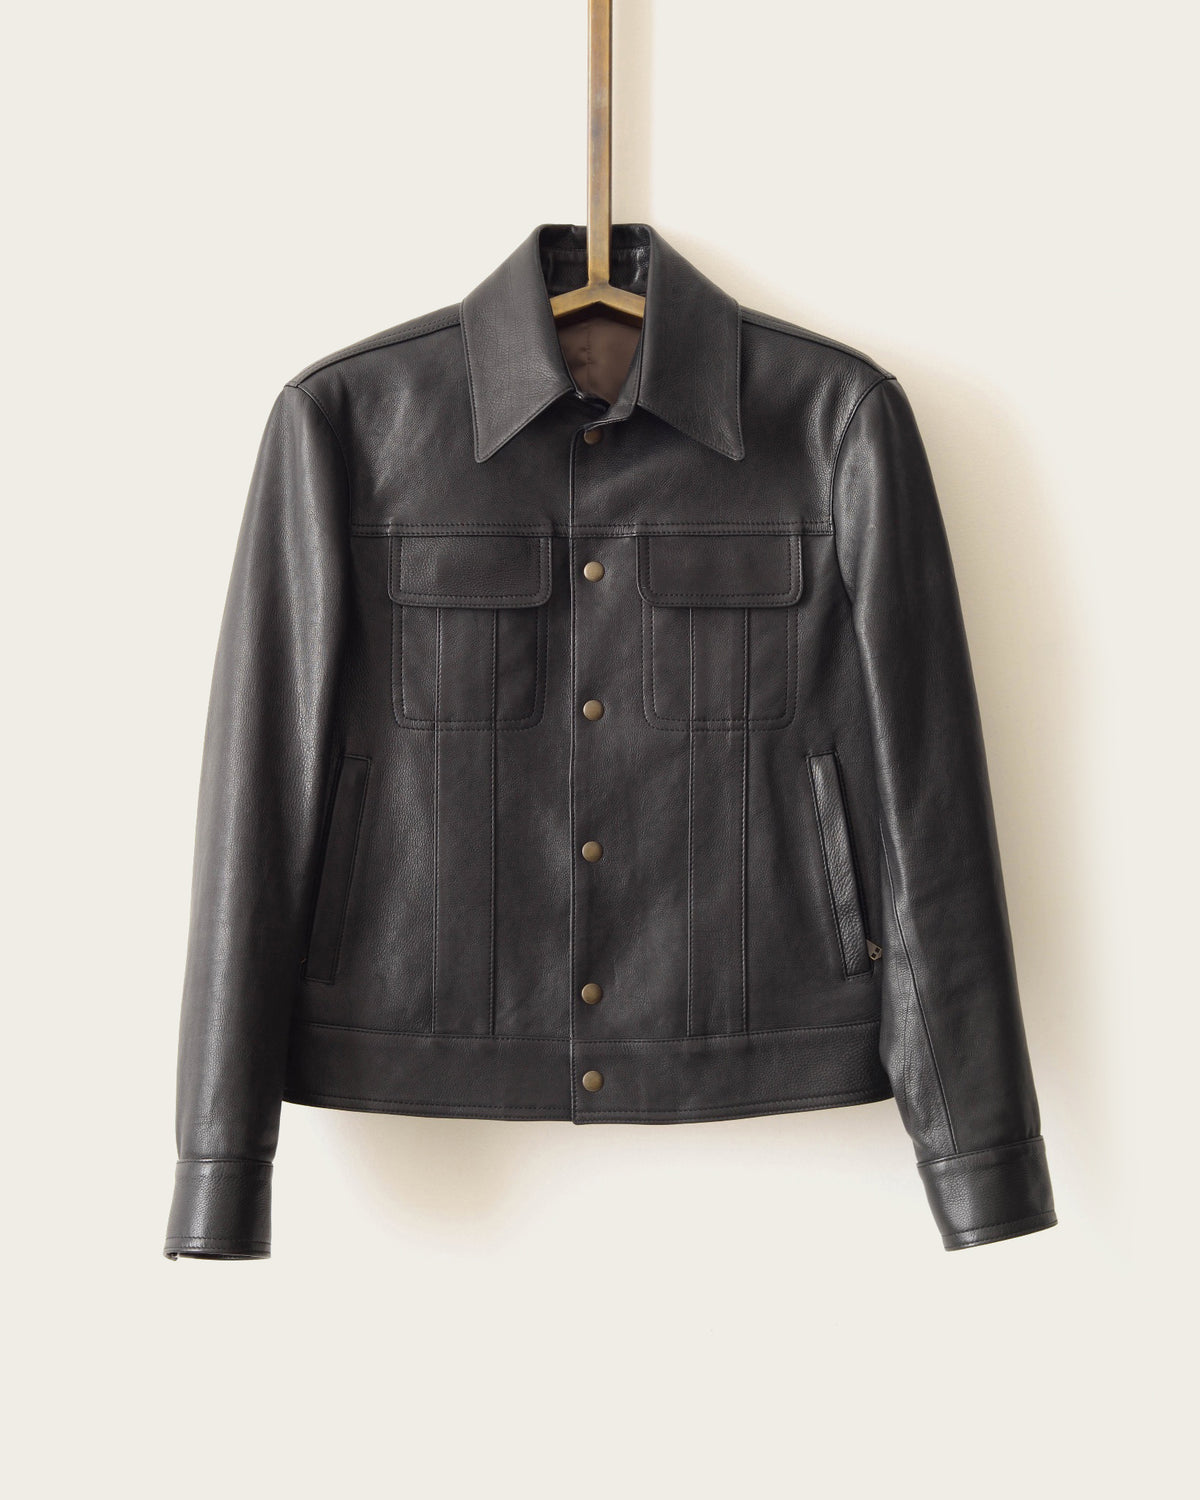 Image of the '68 Special Jacket from Savas